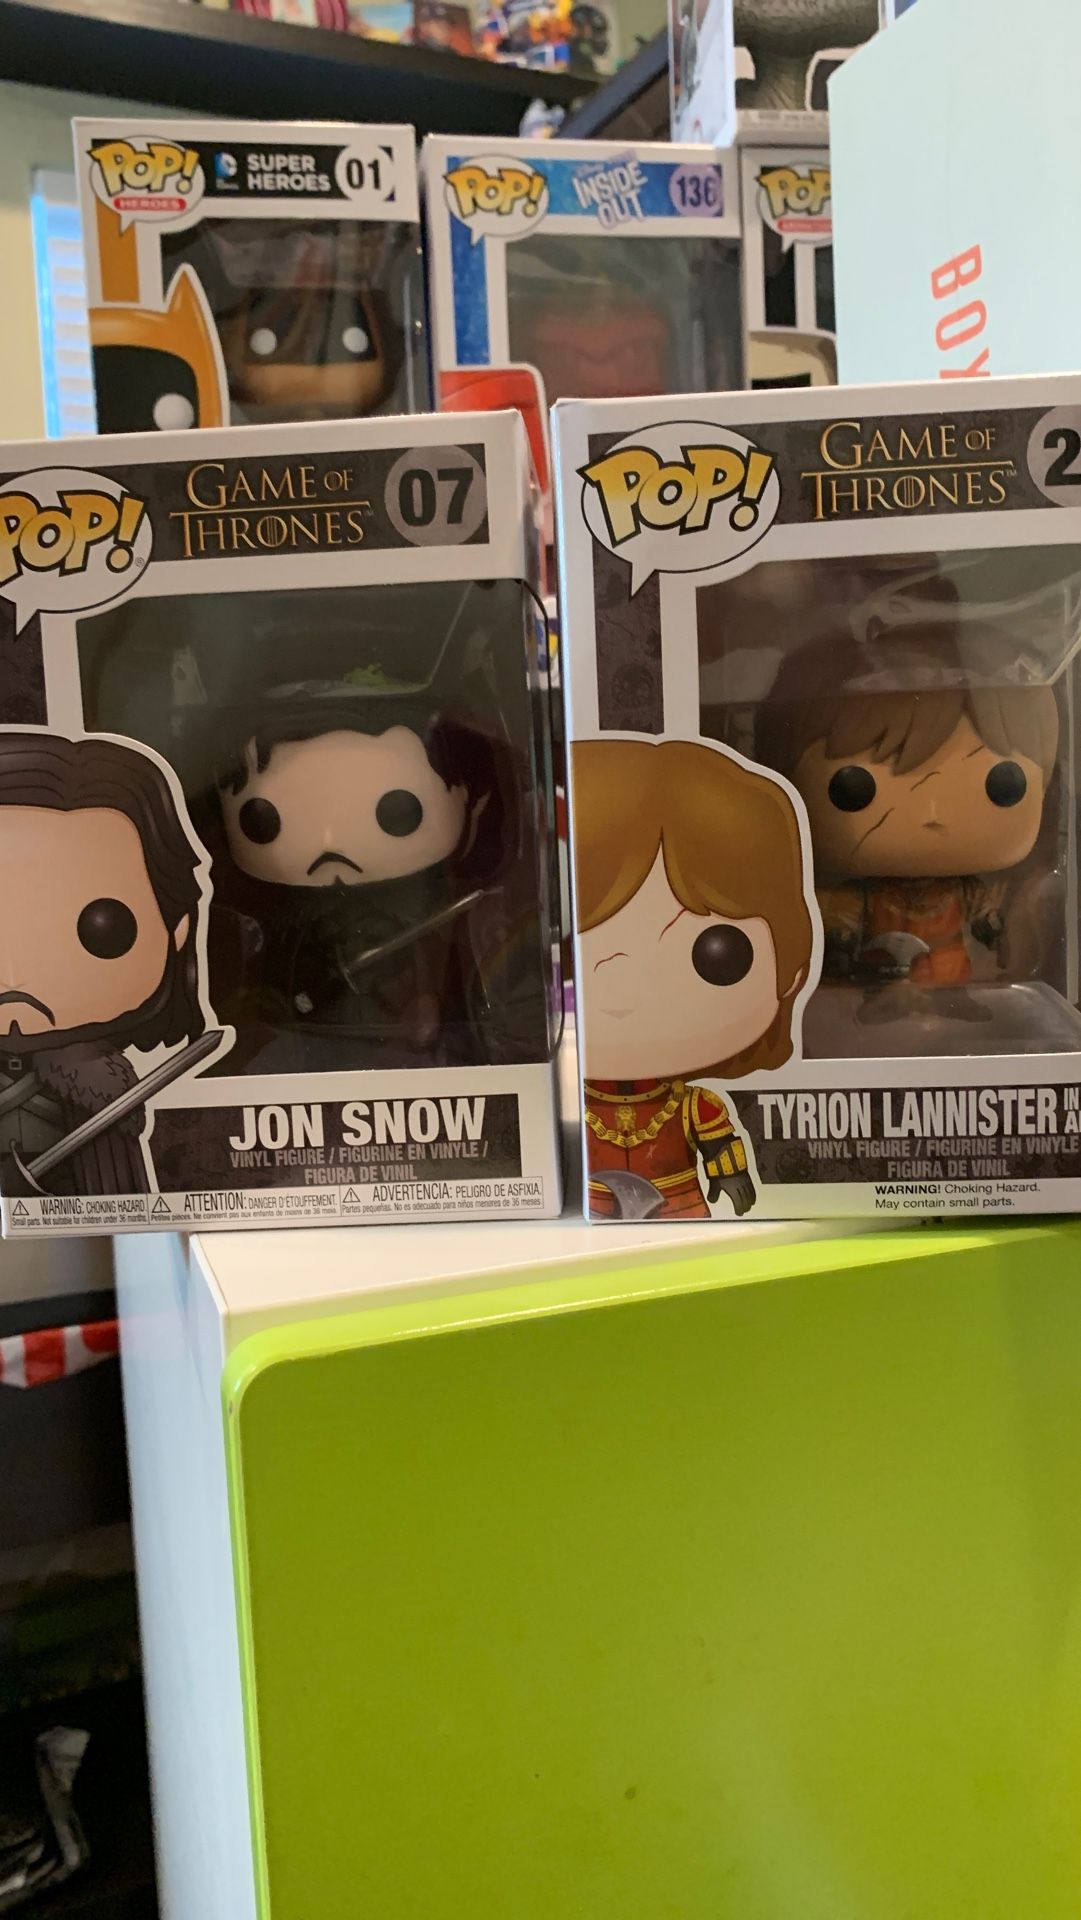 Game Of Thrones Funko Pop (Jon Snow and Tyrion Lannister)